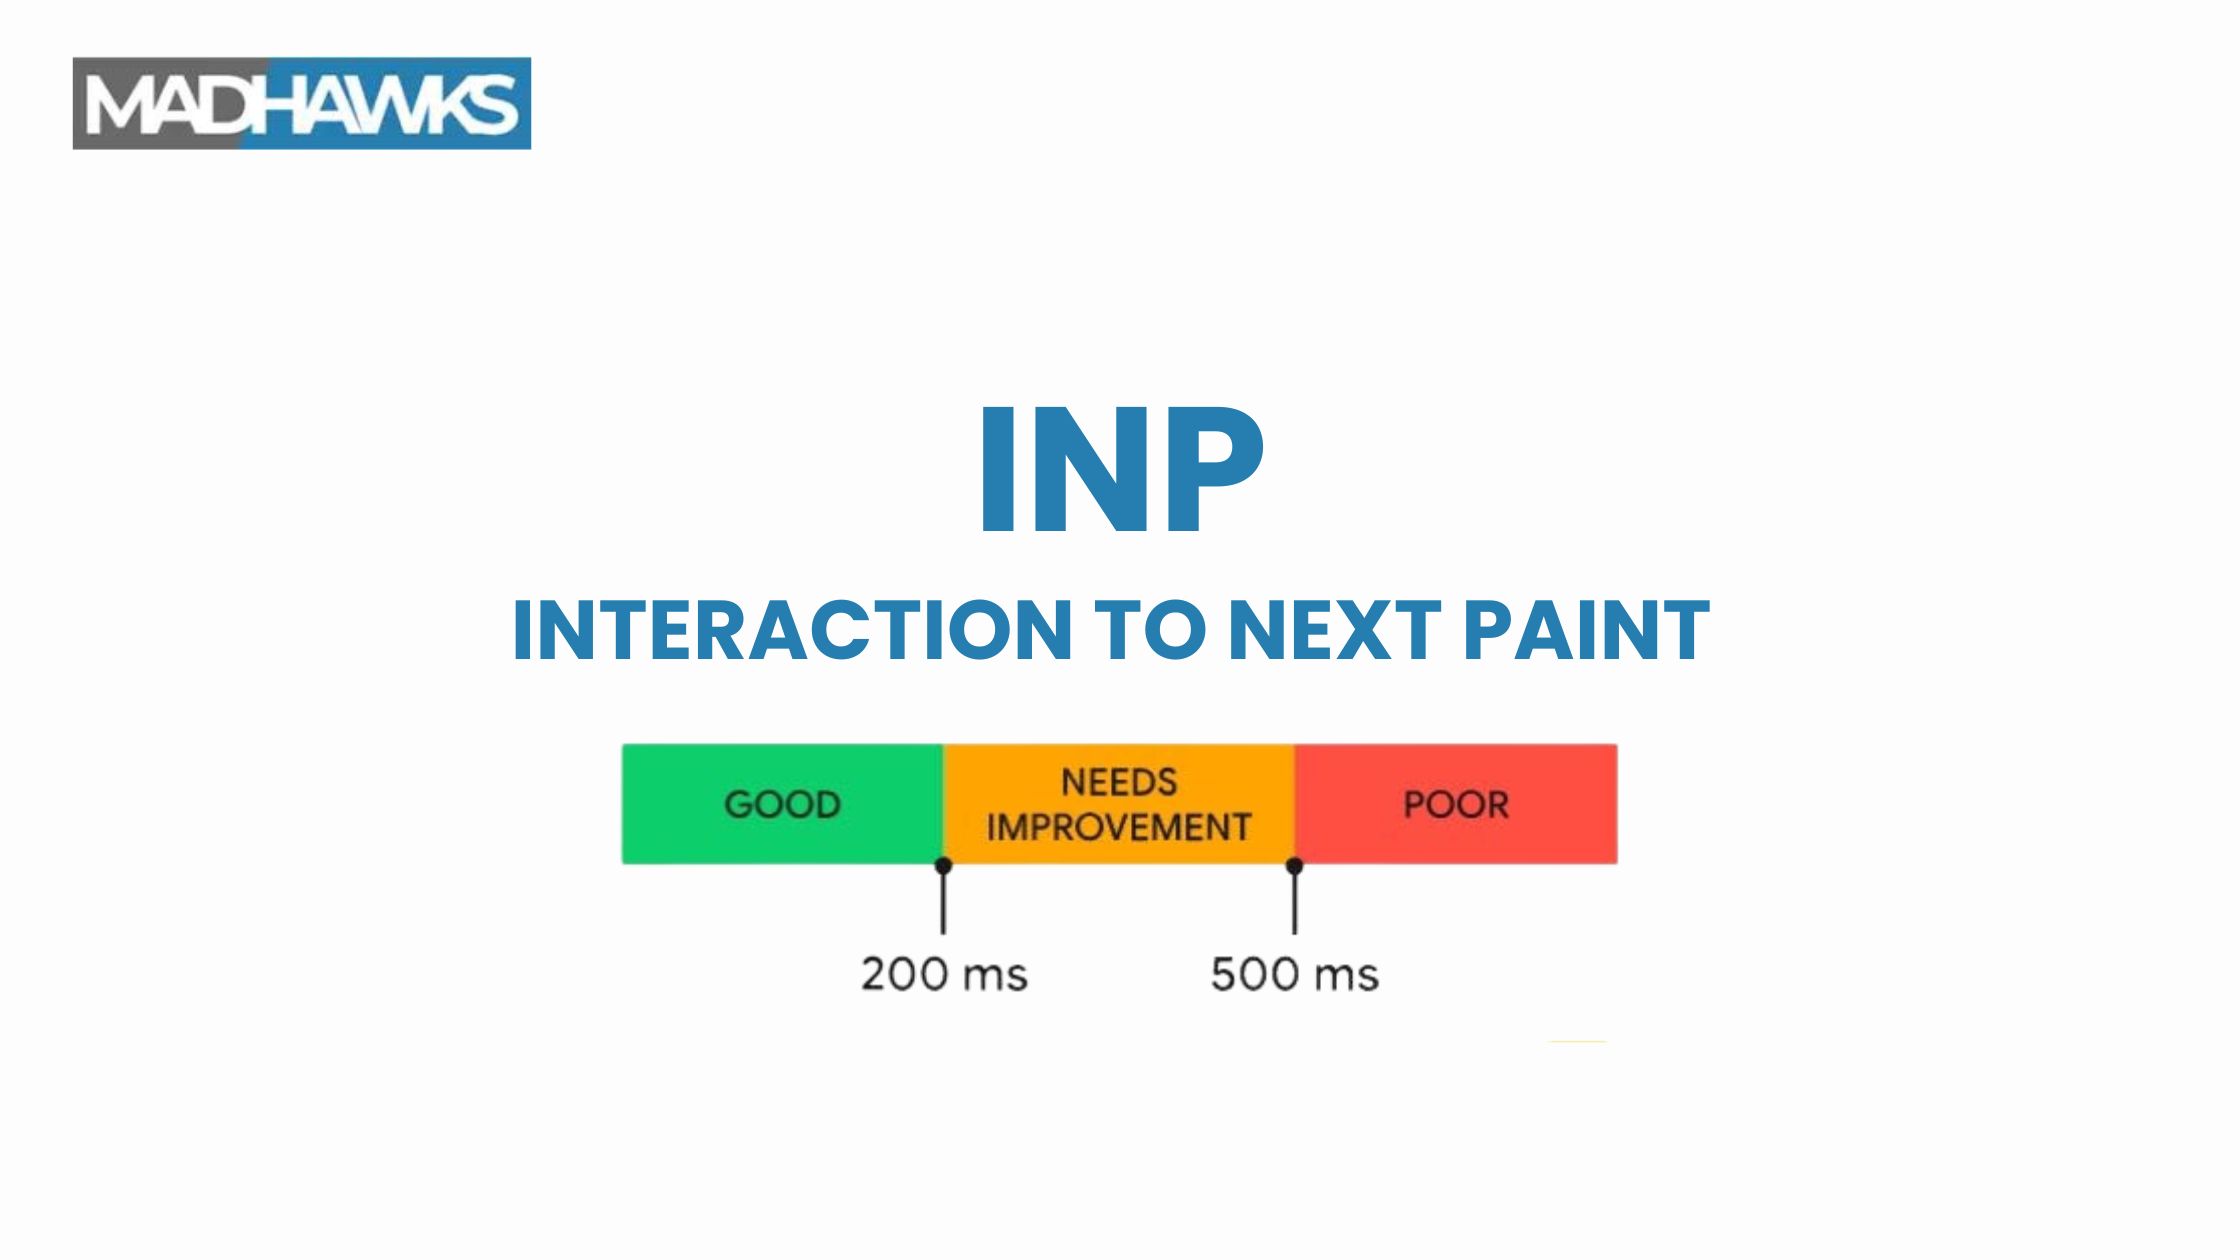 INP (Interaction to Next Paint)